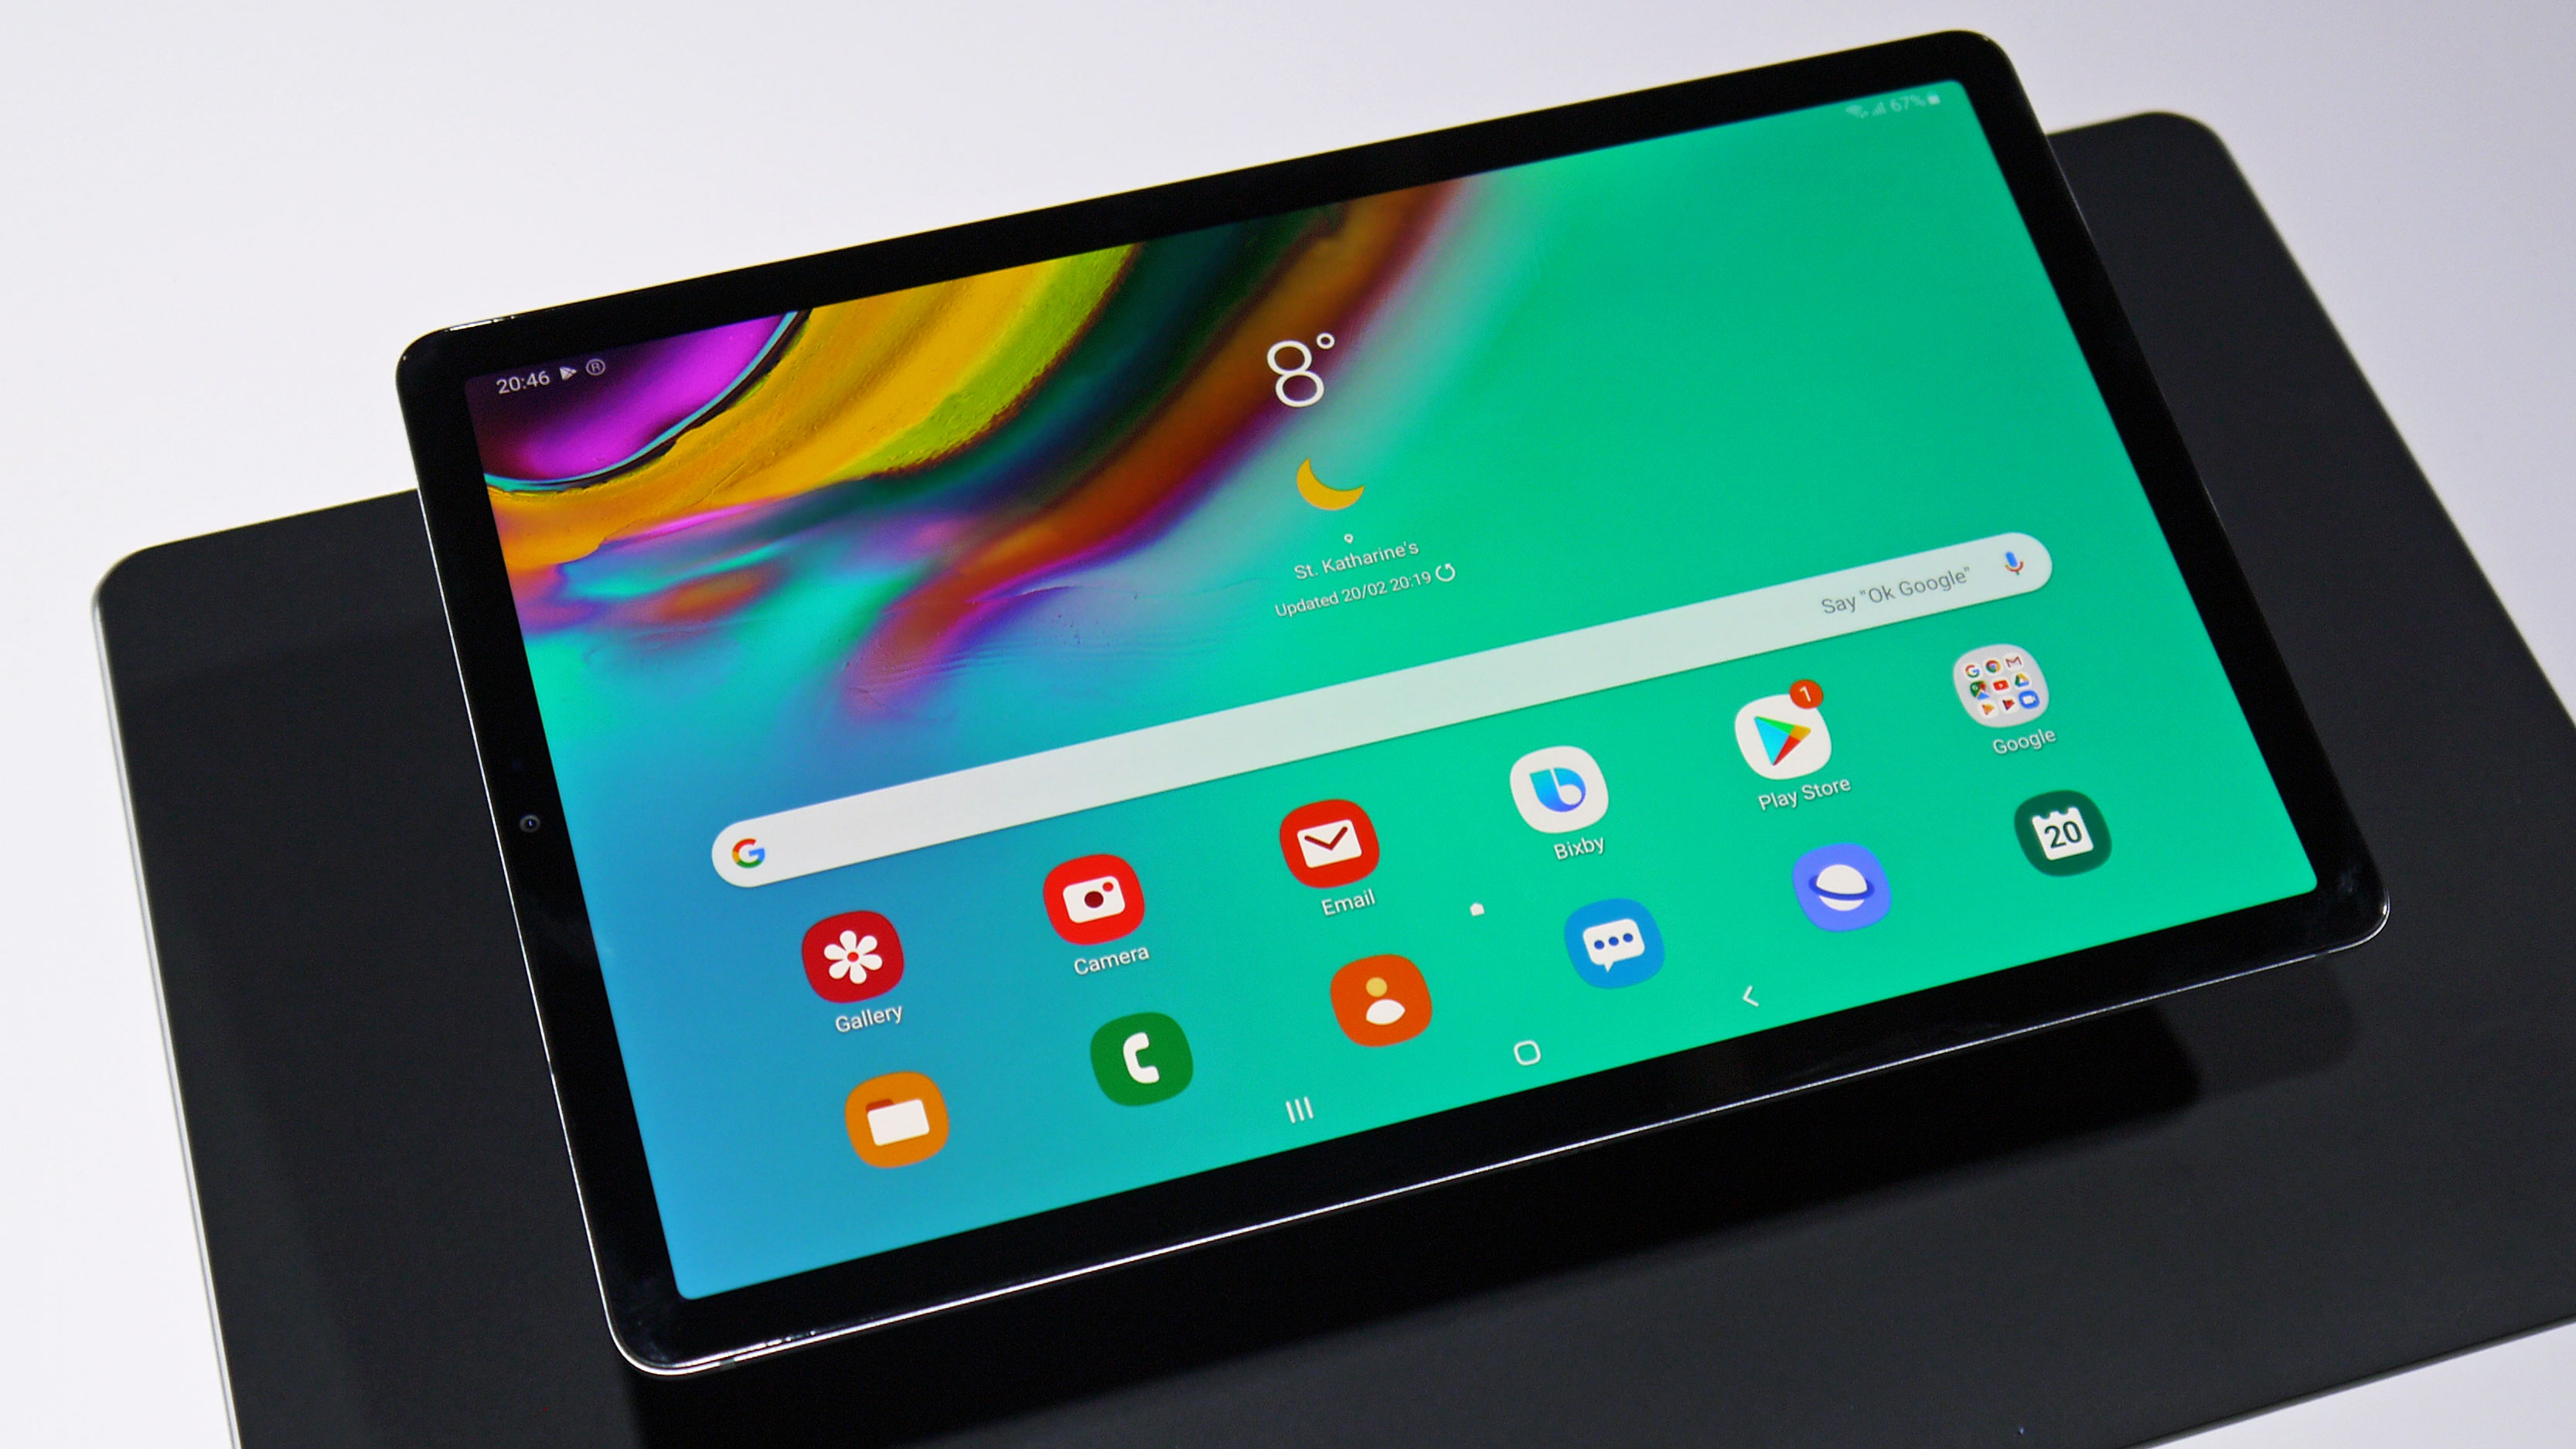 Samsung Launches Galaxy Tab A 2019 As Competitor To New Ipad Mini